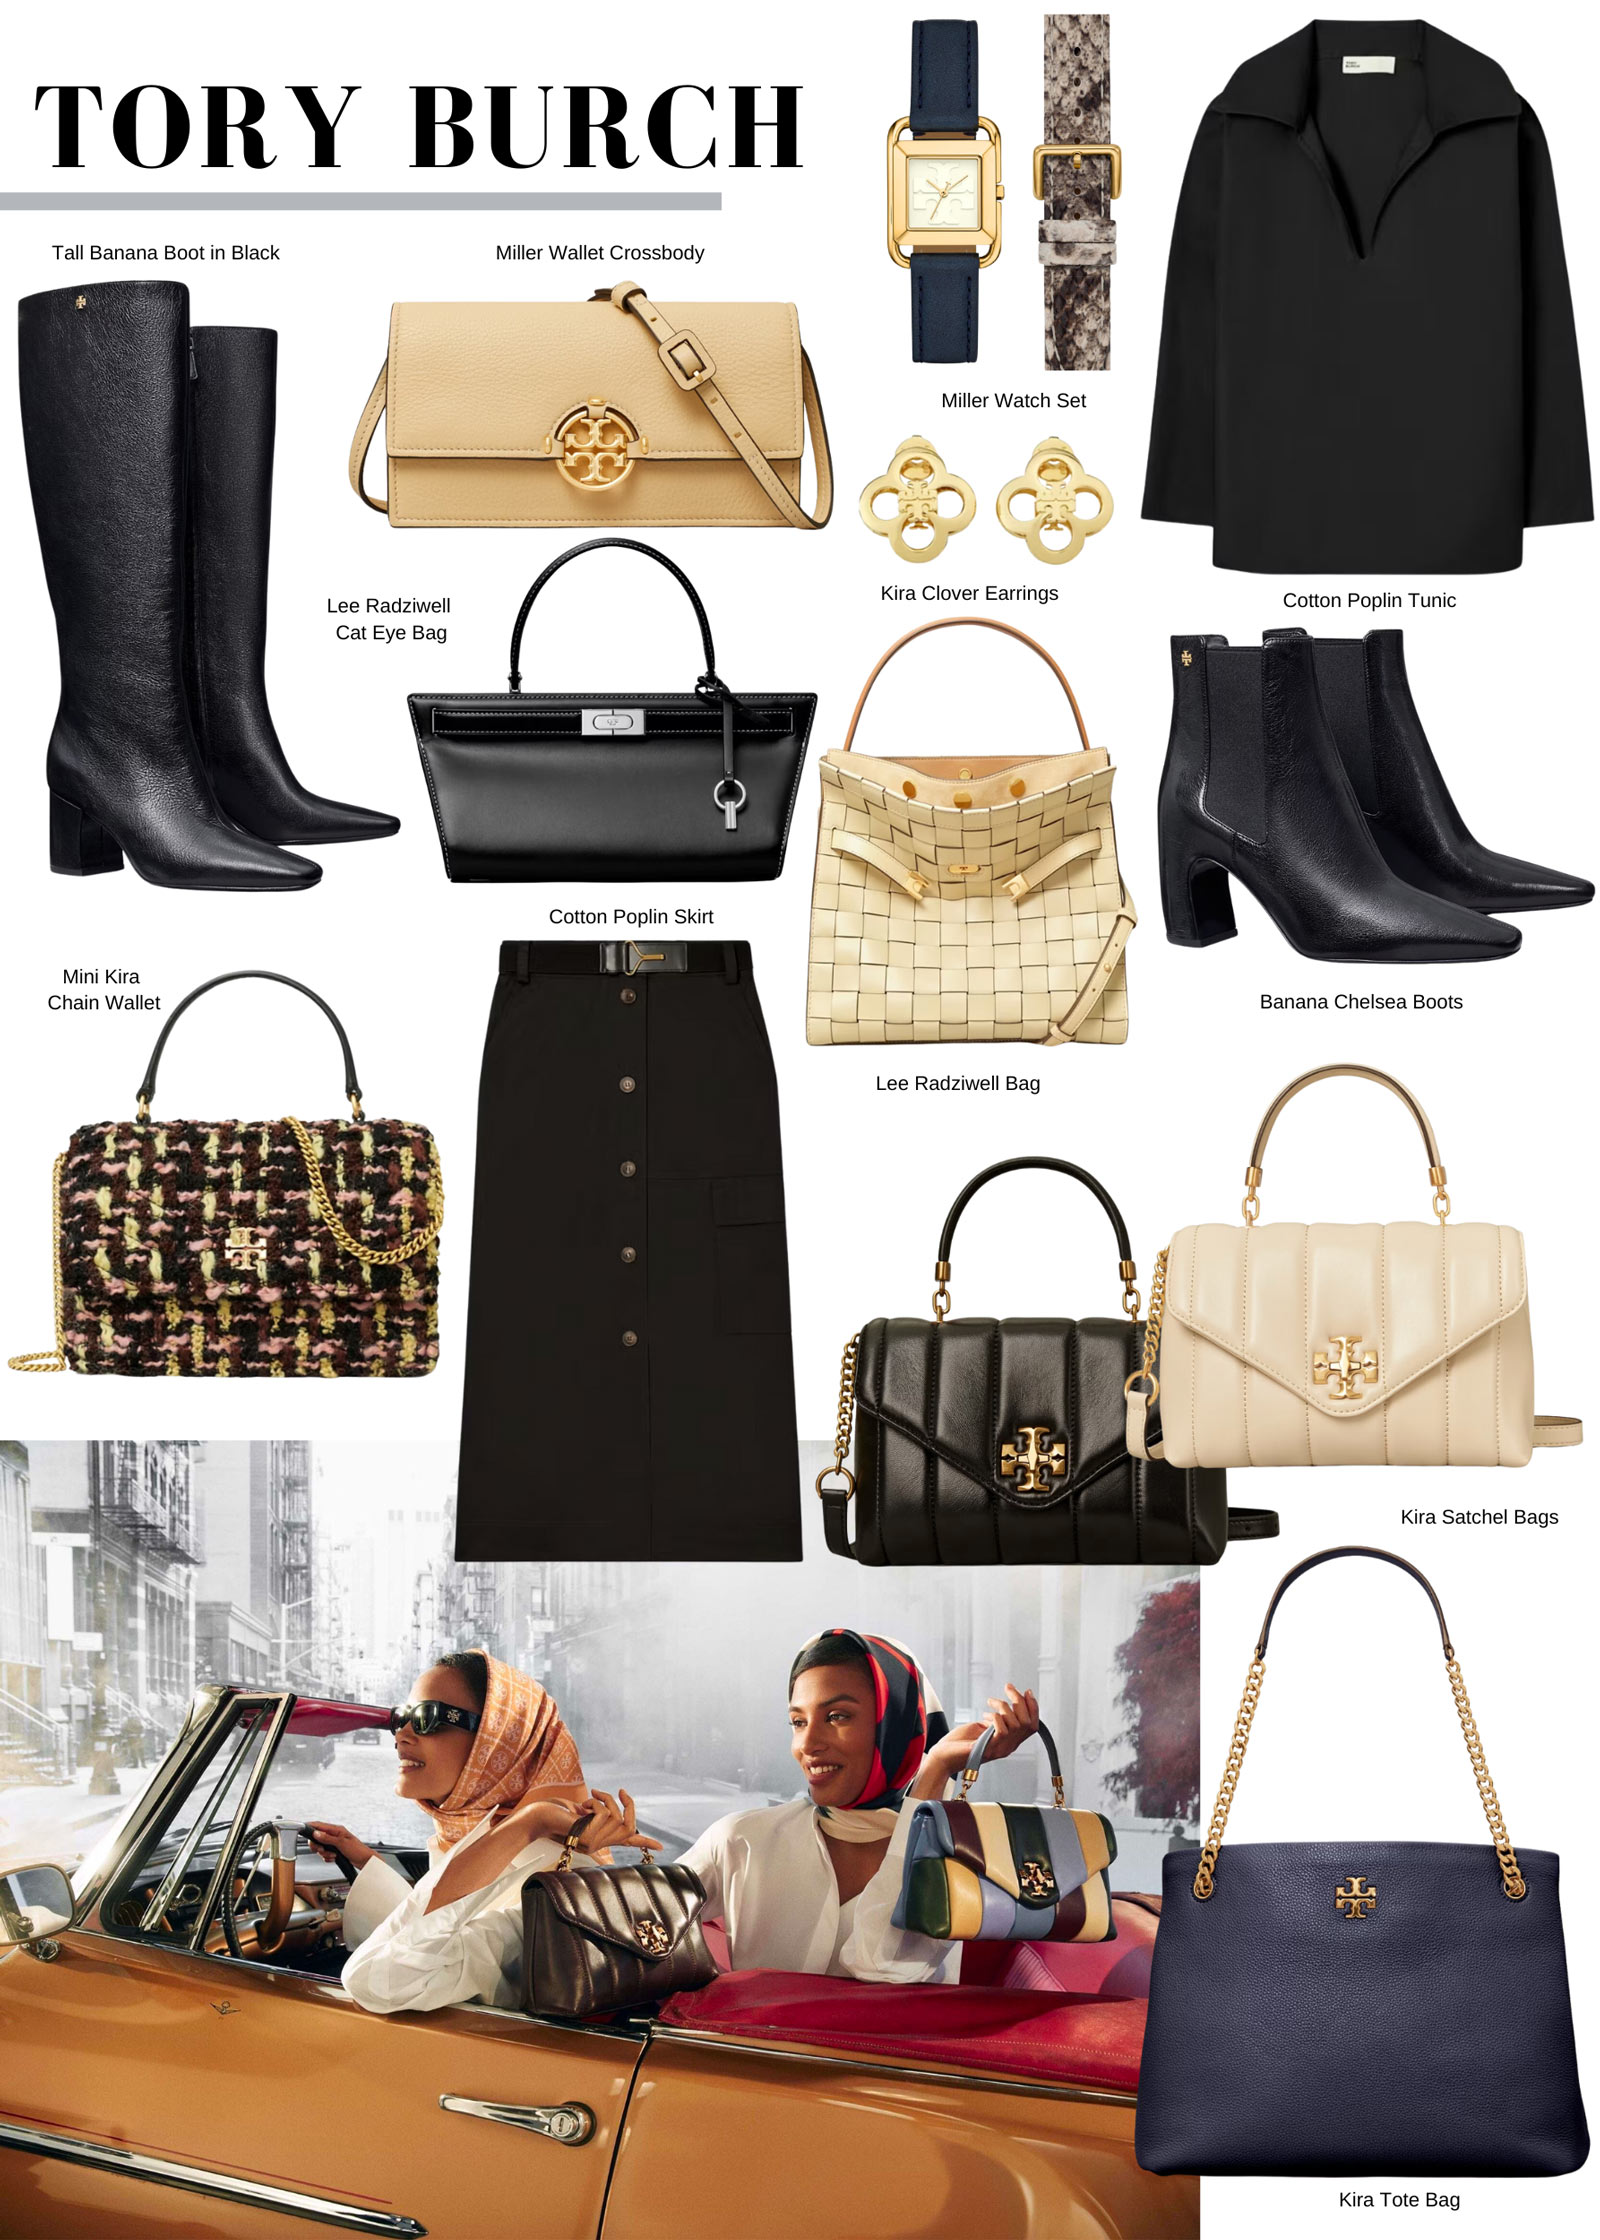 Tory Burch Semi-Annual sale: Save an extra 25% on bags and shoes - Reviewed